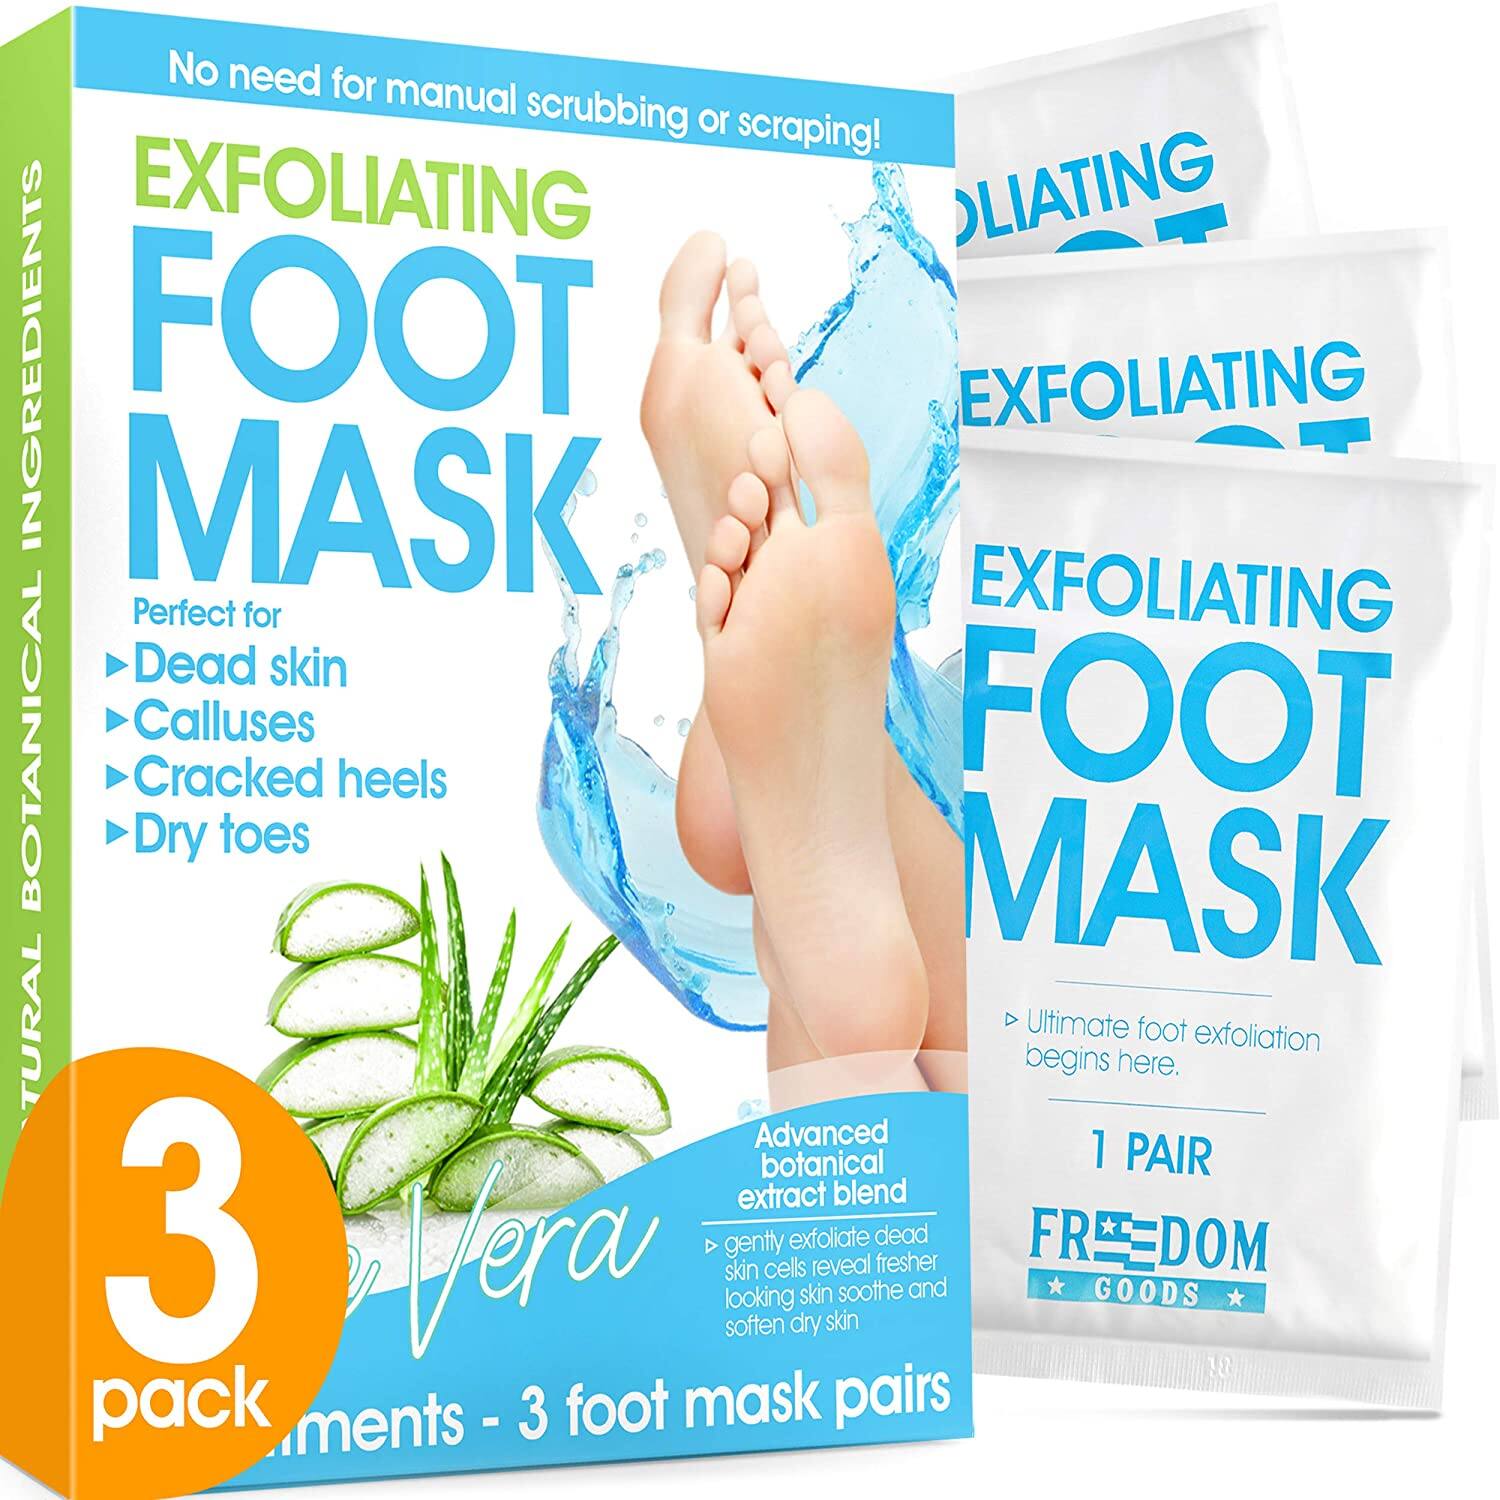 Foot Peel Mask (3 Pack), Foot Mask with Aloe Vera, Exfoliating - $10 + Free Shipping w/ Prime or Orders $25+